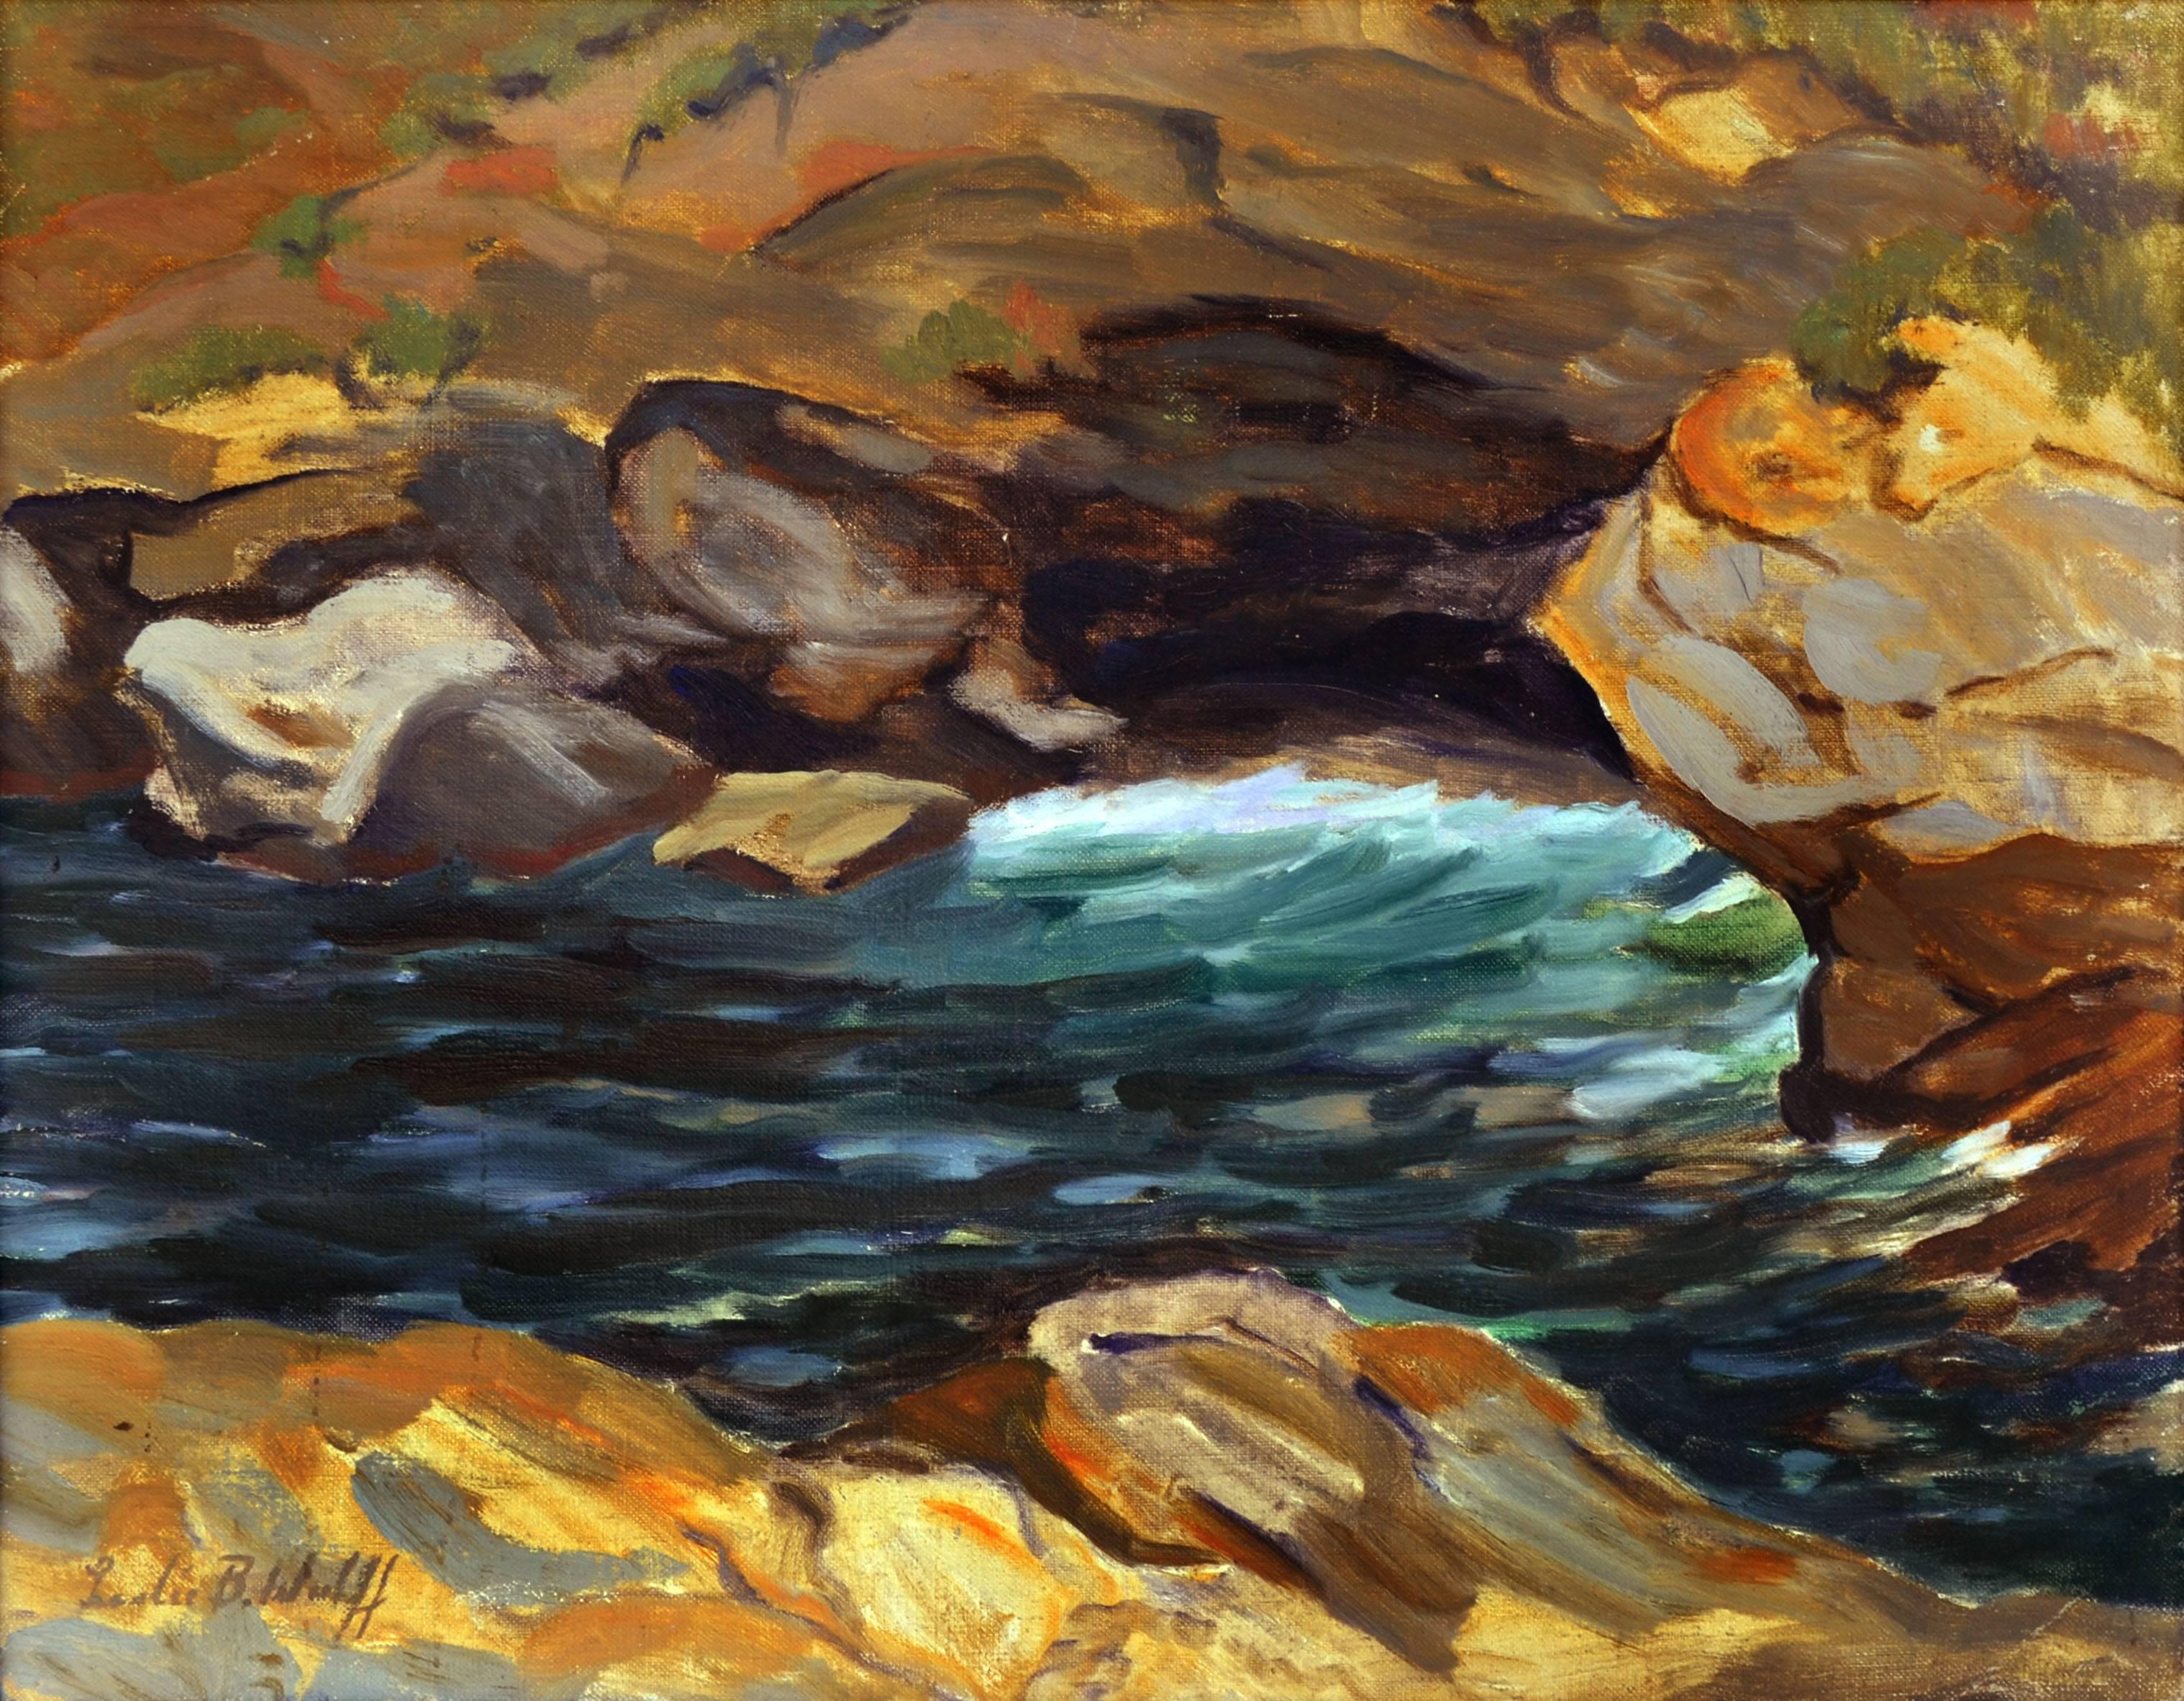 Water on the Rocks - 1930's Abstracted Landscape - Painting by Leslie Bruner Wulff